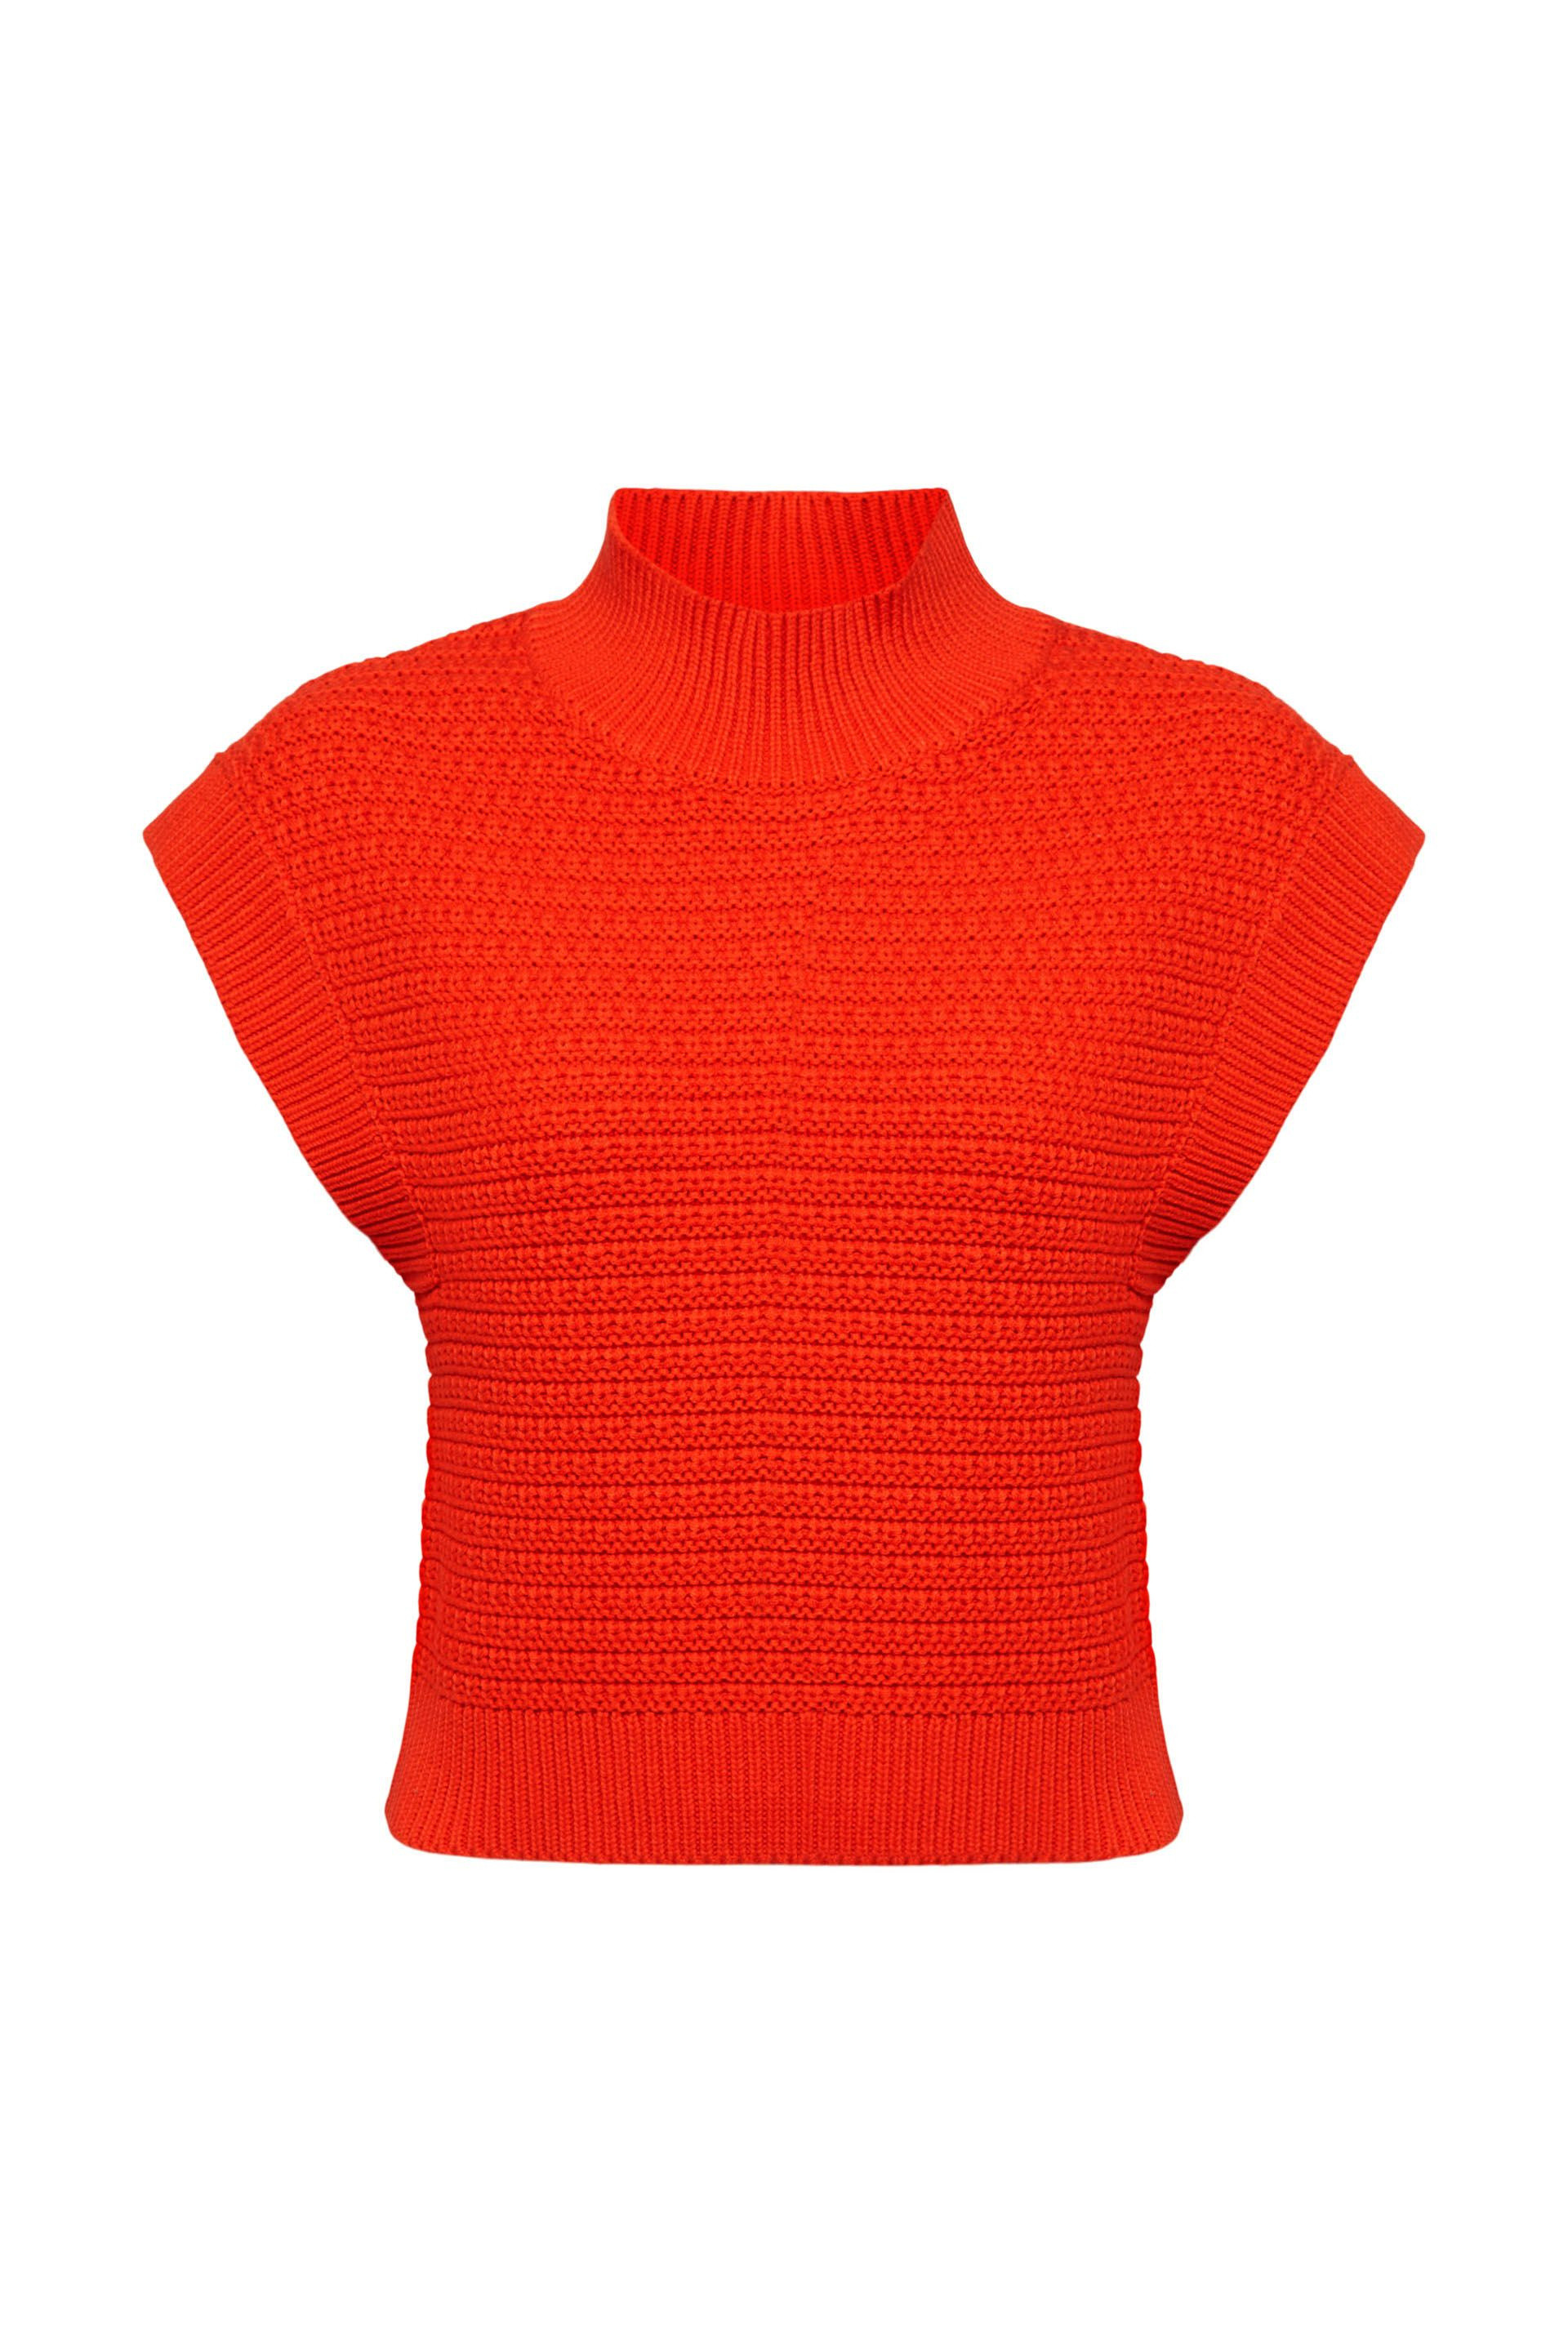 Esprit - Gilet a maglia in misto cotone, Rosso, large image number 0